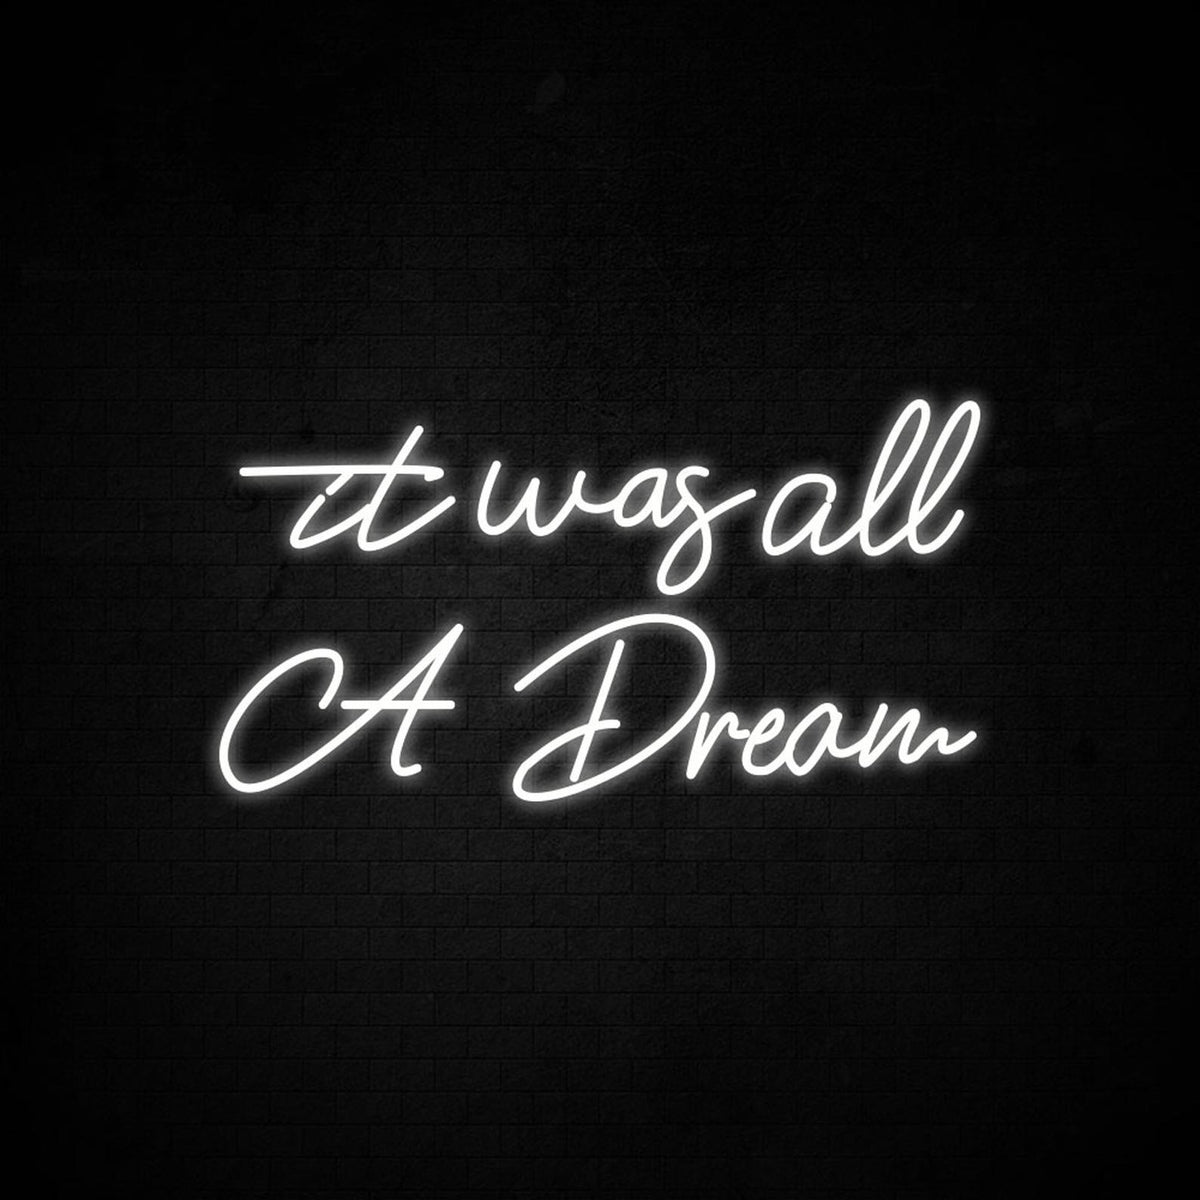 &quot;it was all a dream&quot; Neon Led Sign